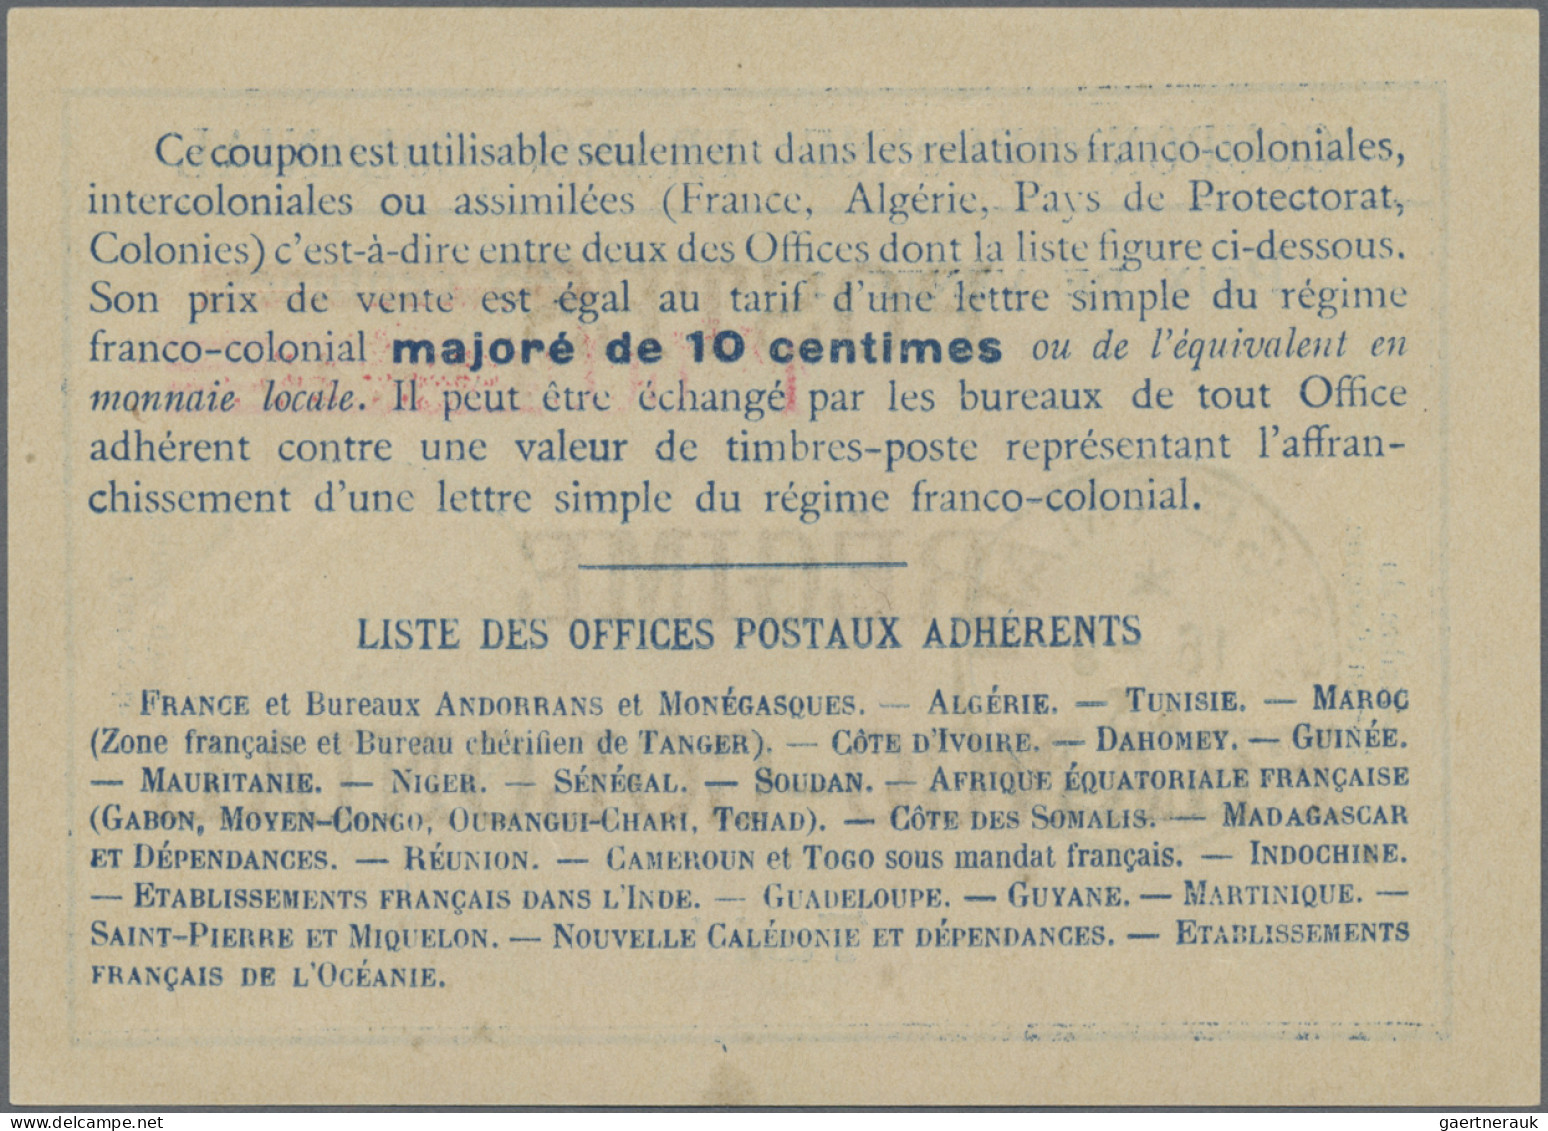 Tunisia - Postal Stationery: 1943 Coupon-Réponse Franco-Colonial "1Fr 60" On "1F - Tunisie (1956-...)